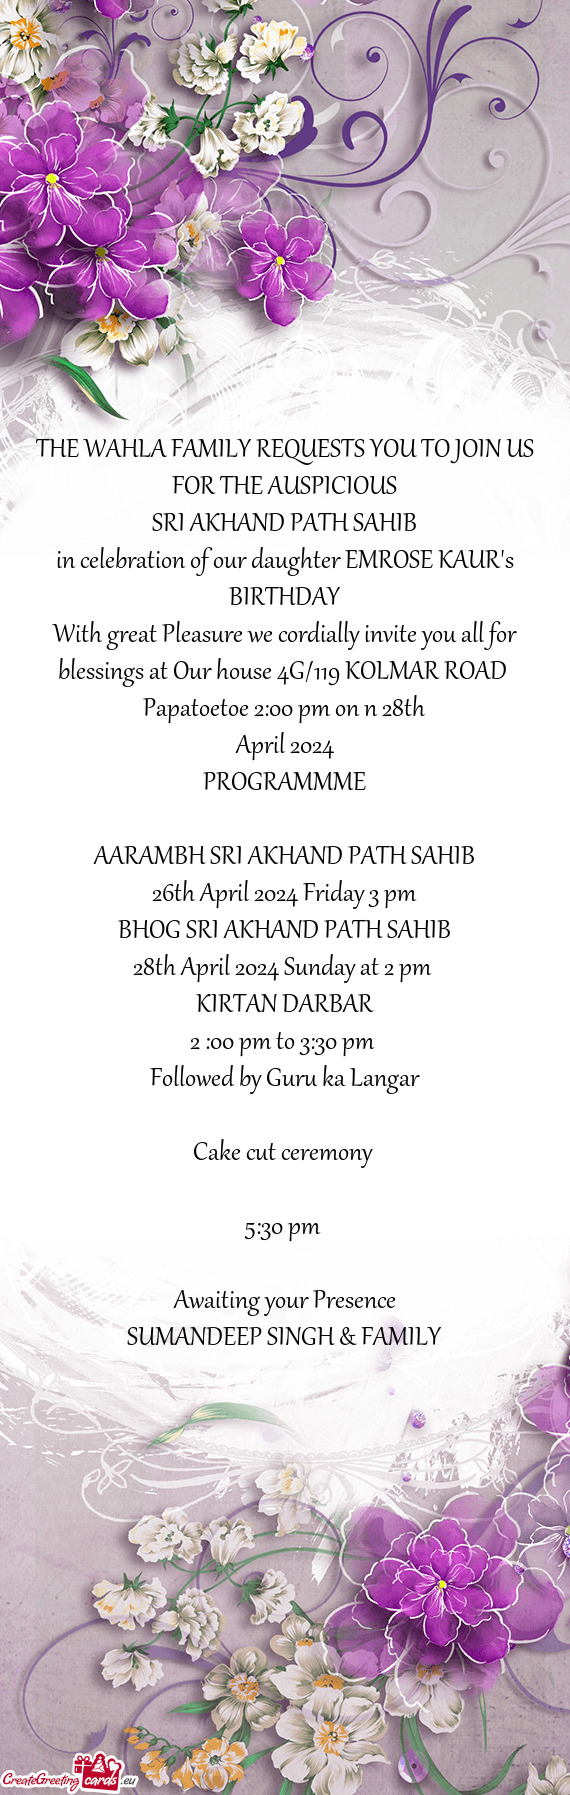 With great Pleasure we cordially invite you all for blessings at Our house 4G/119 KOLMAR ROAD Papat